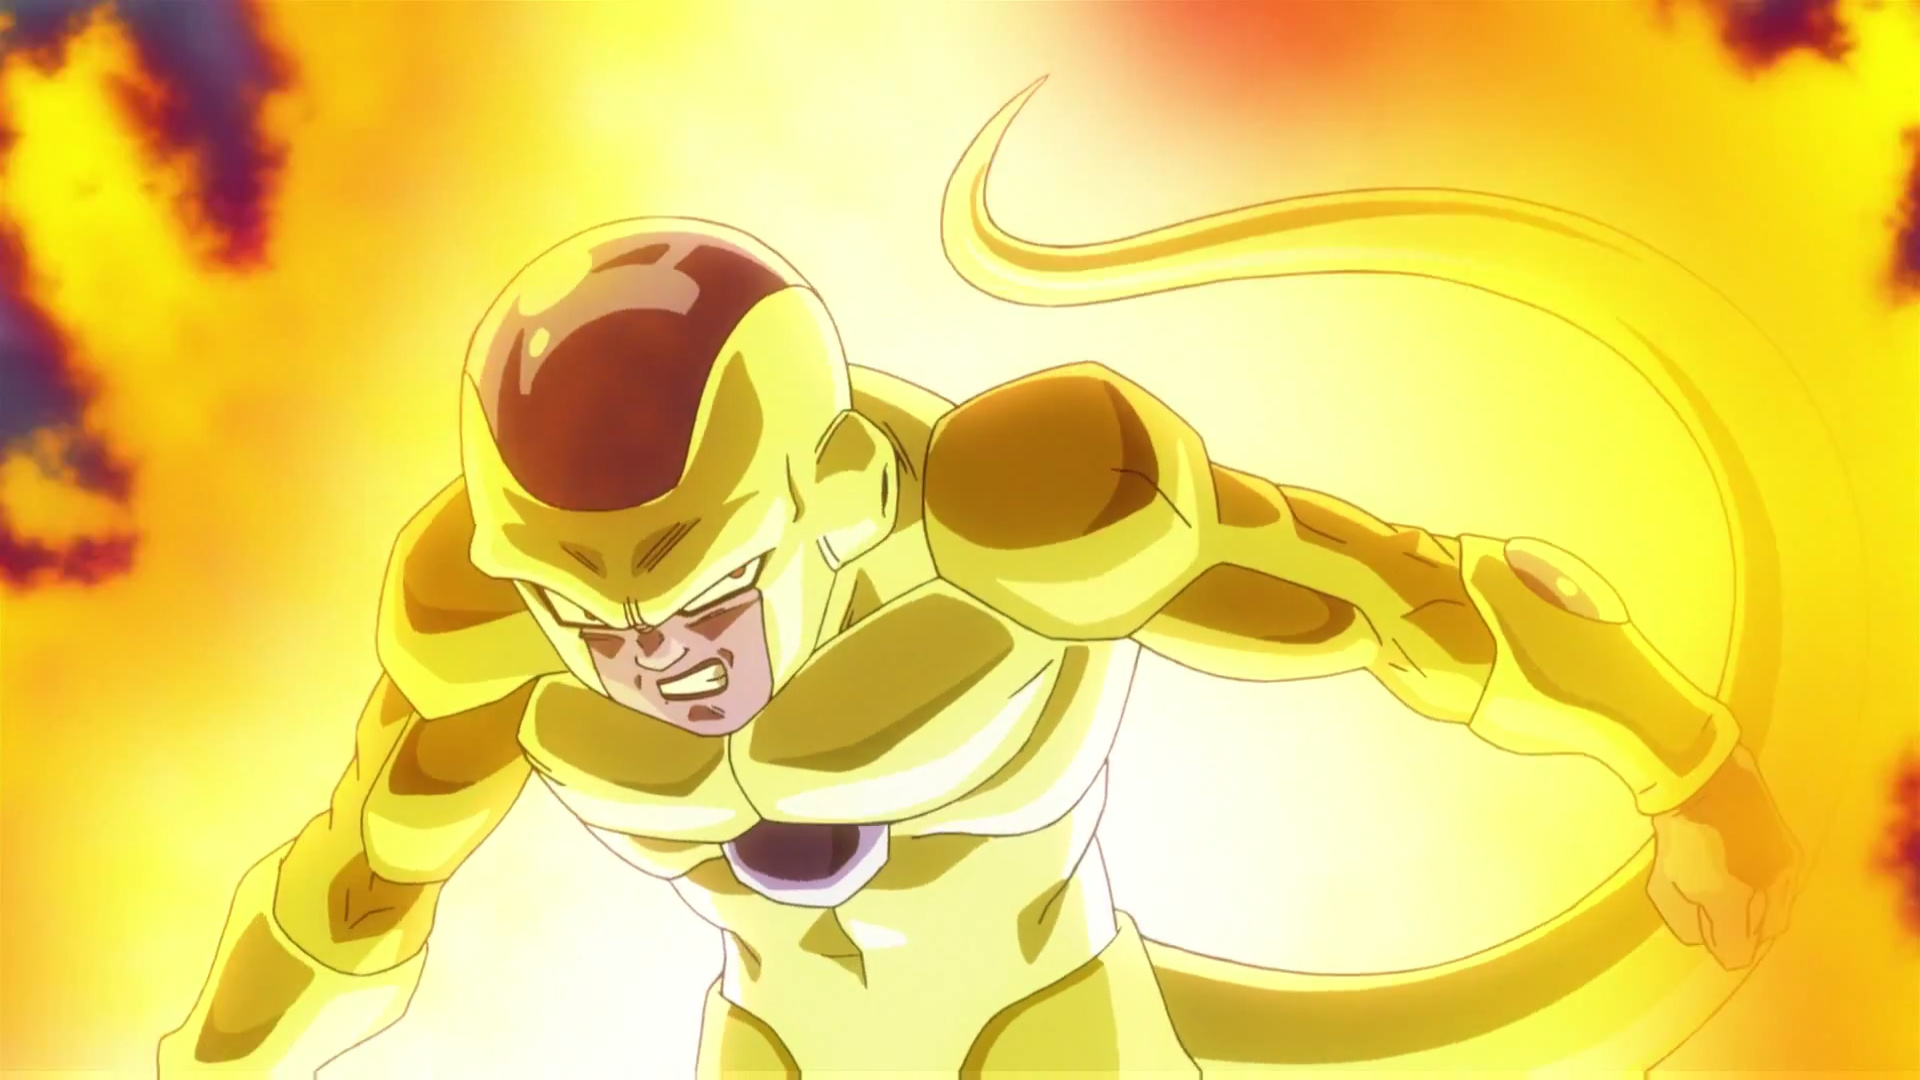 Golden Frieza: Antagonist, Dragon Ball films and universe, Japanese anime, Frieza Clan. 1920x1080 Full HD Wallpaper.